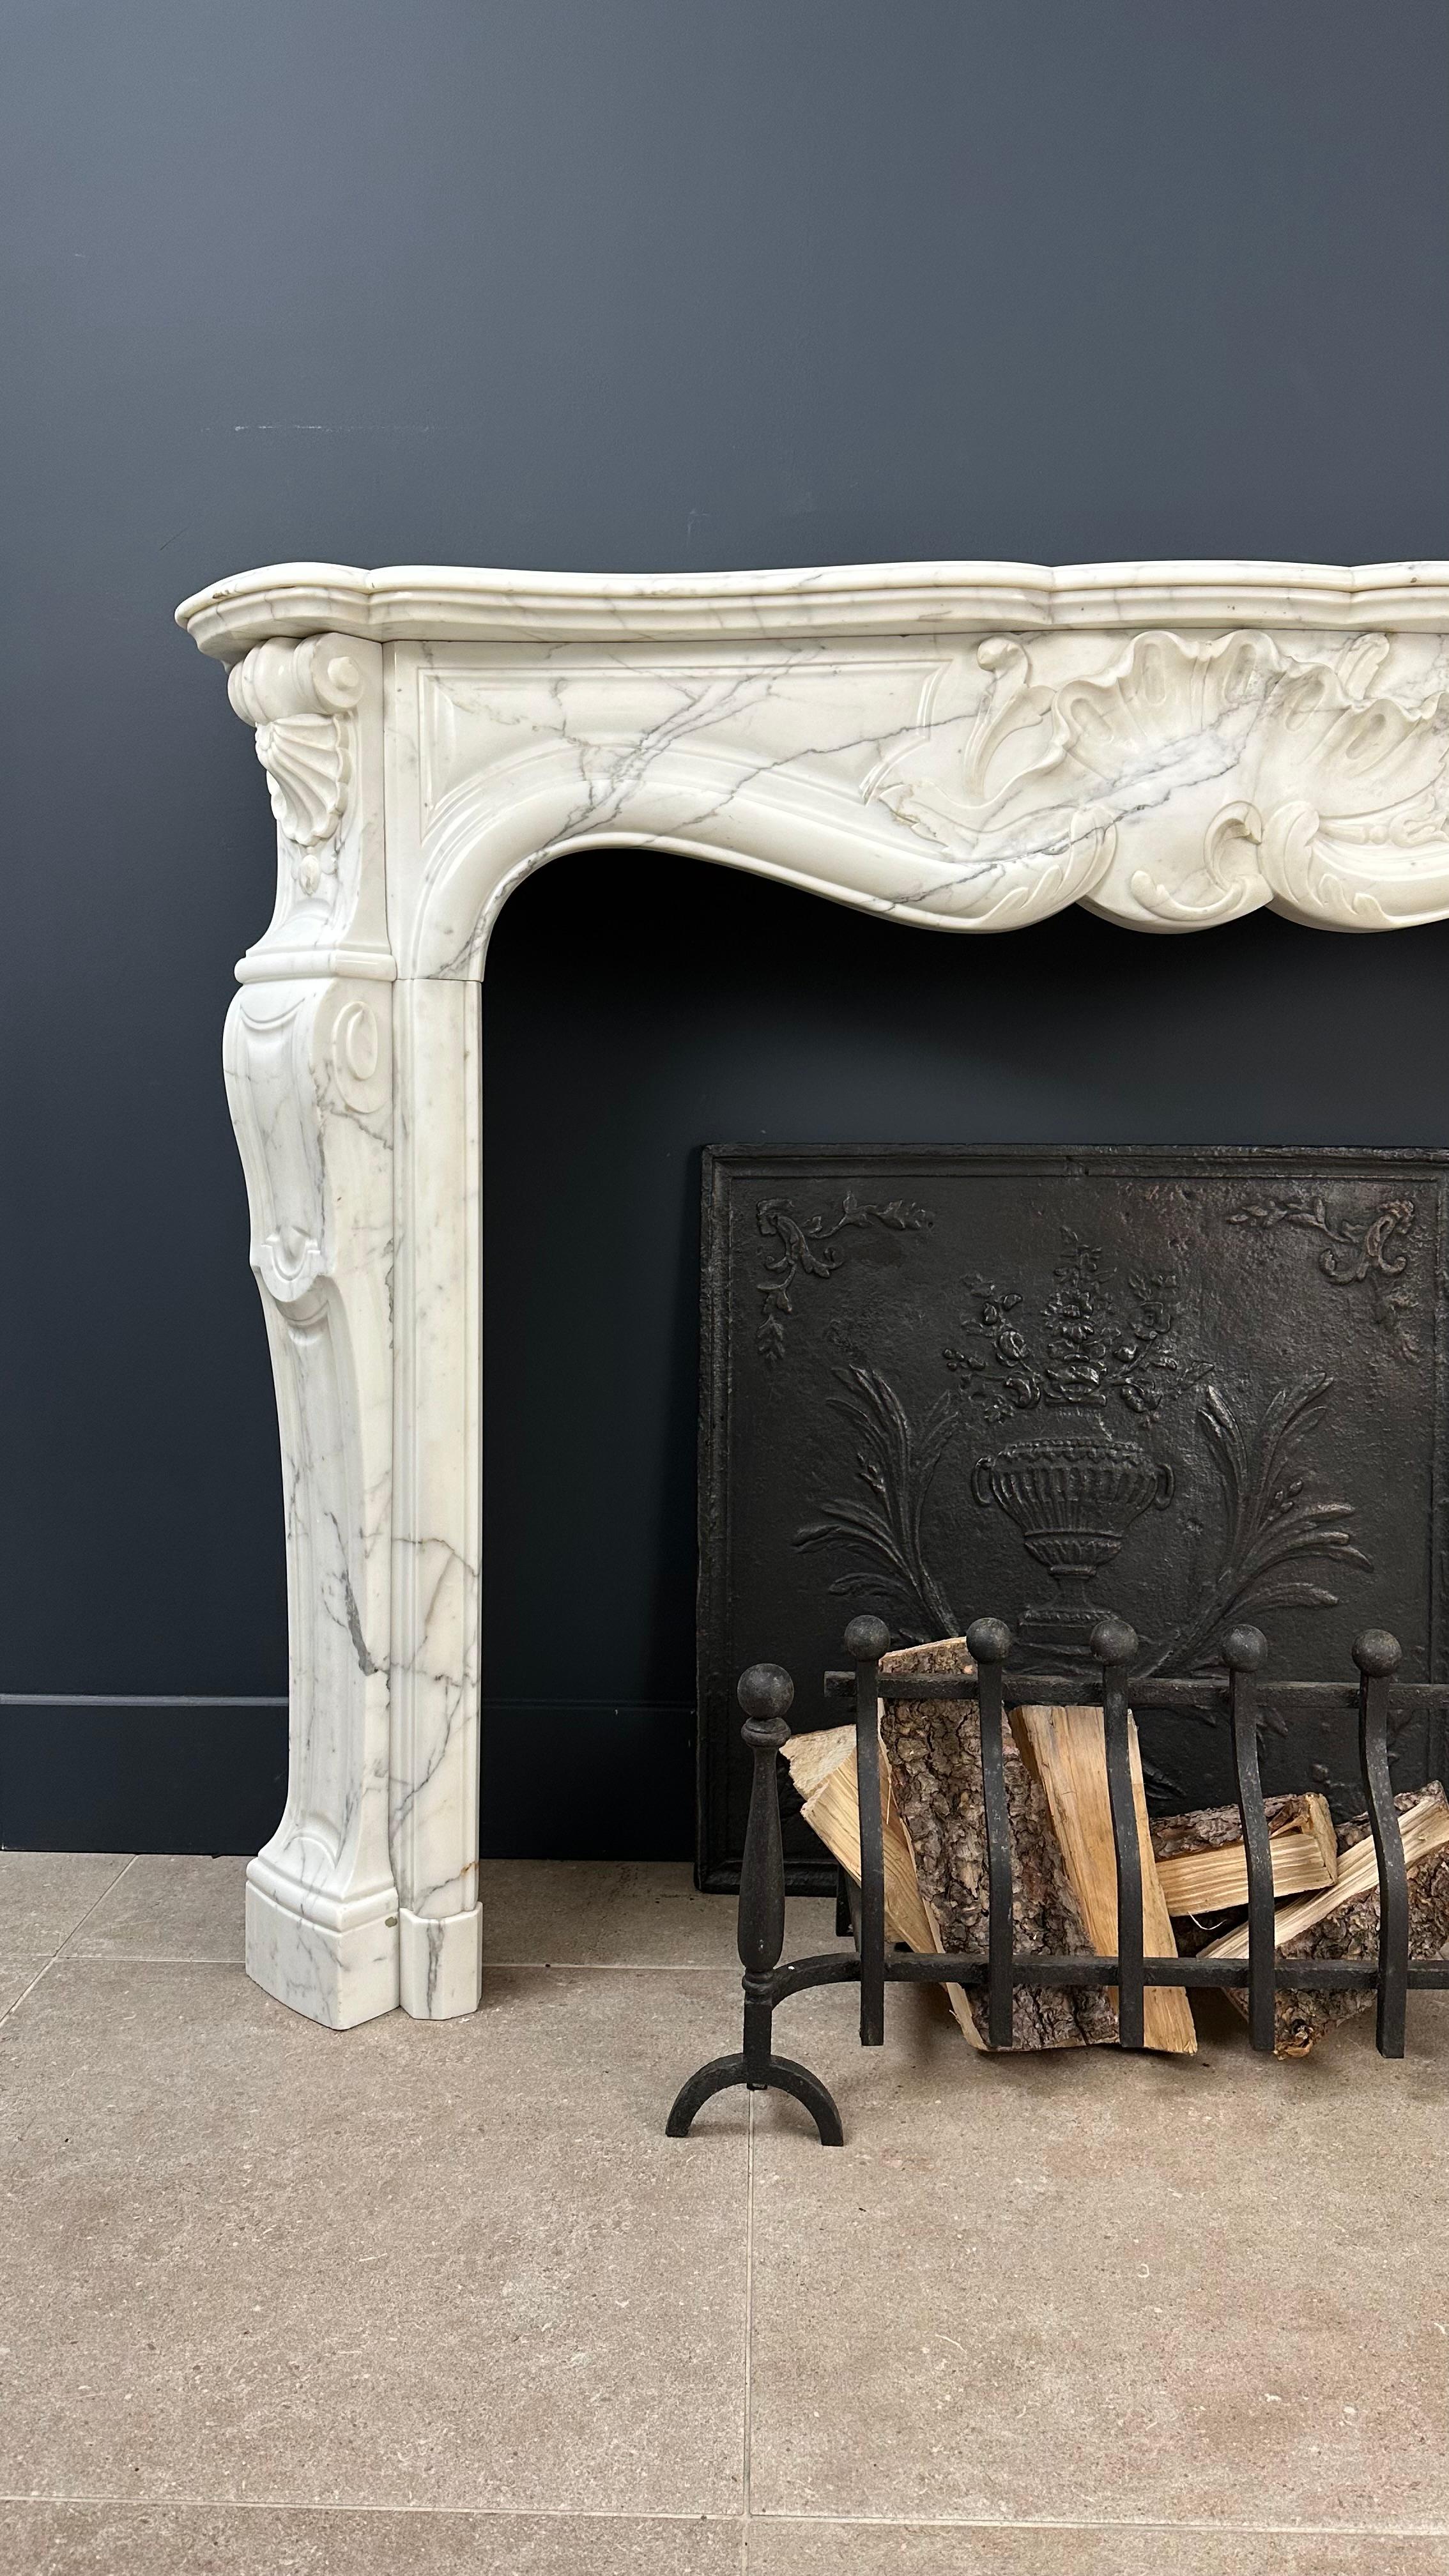 Indulge in the timeless charm of this exquisite antique front fireplace. Crafted in the opulent Rococo style, this fireplace stands as a testament to the artistry of a bygone era. Meticulously carved from a stunning veined white marble, every detail